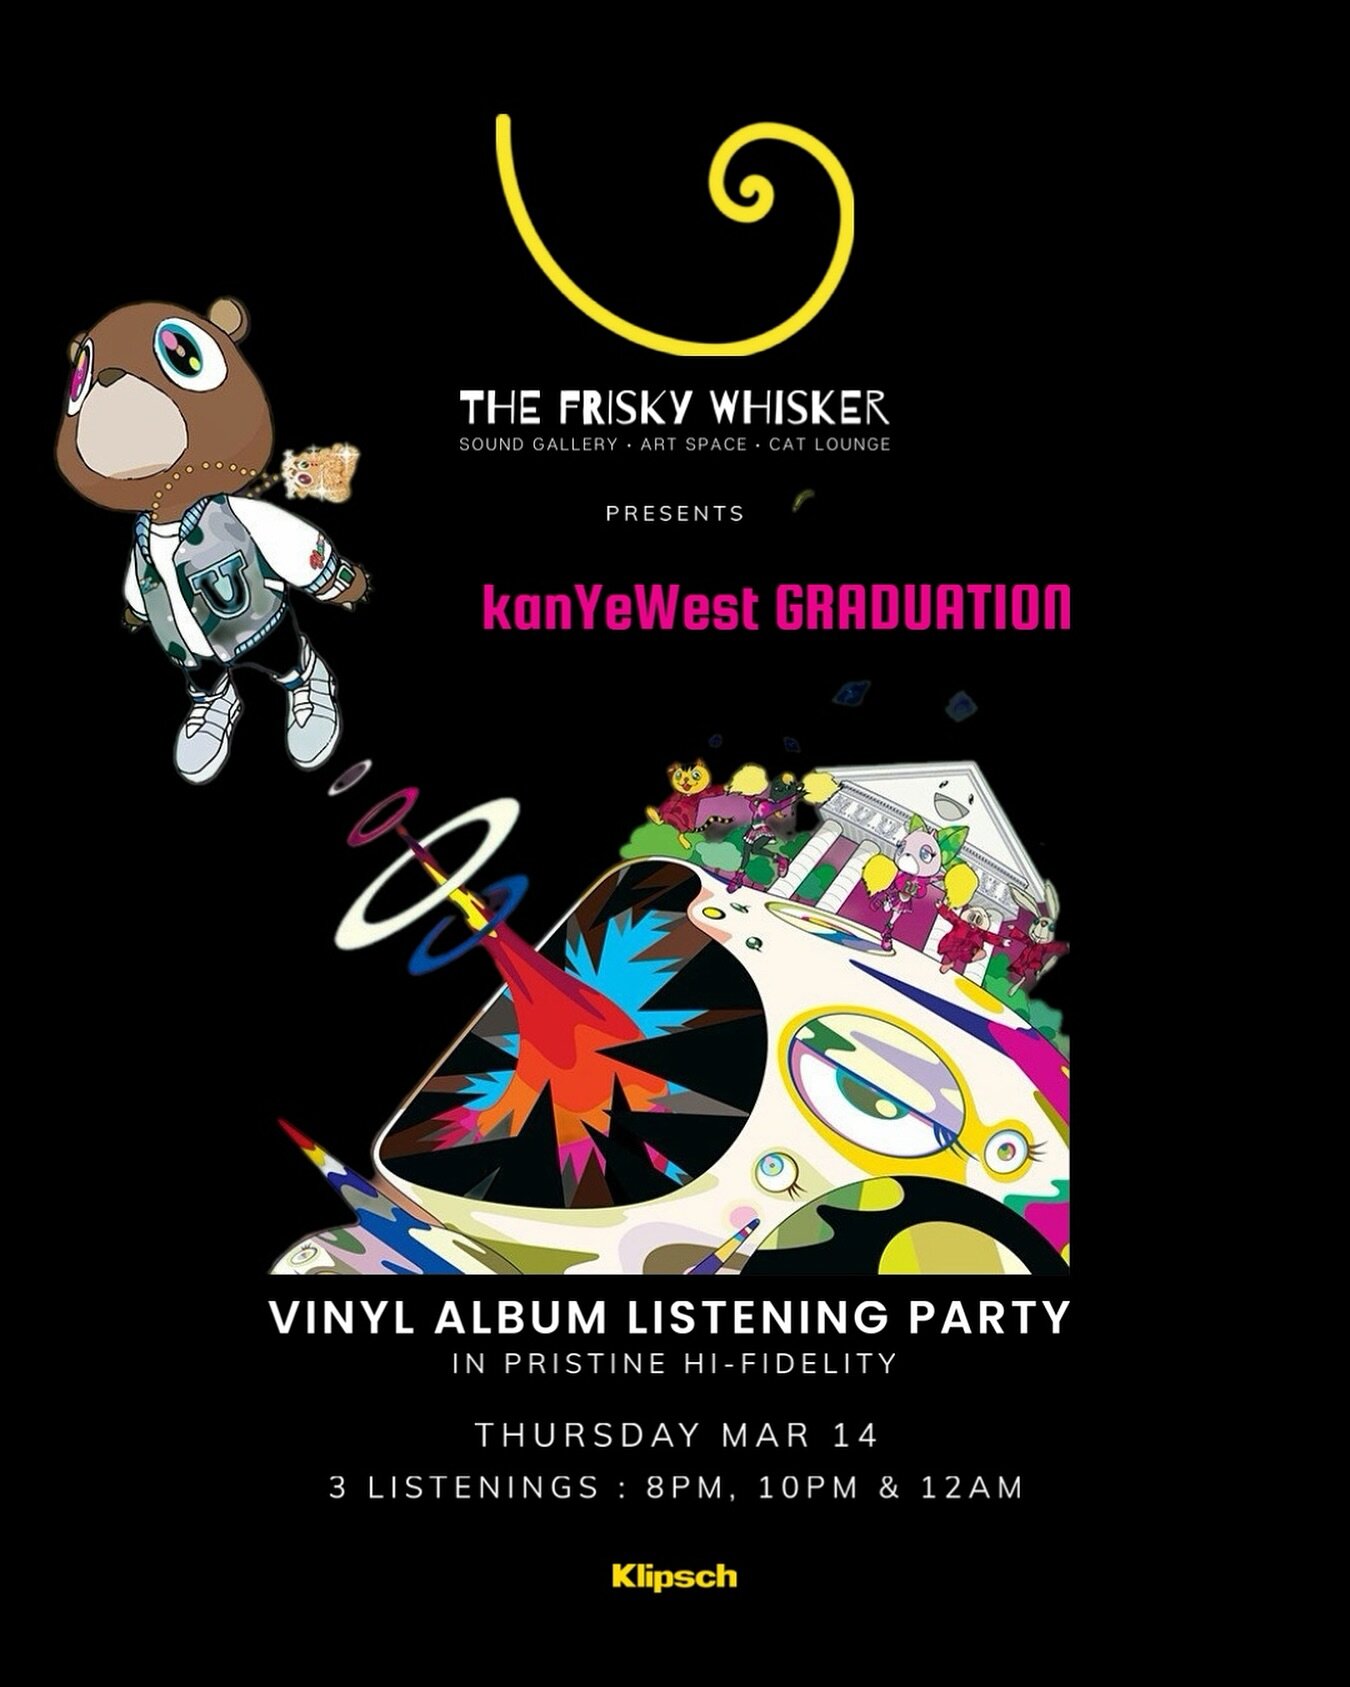 Kanye West - Graduation on Vinyl this Thursday for our weekly Vinyl Album Listening Party. 

This is a very rare unofficial press of the album, as the Album was never officially pressed by the Label.

You&rsquo;ll get to experience the album like nev